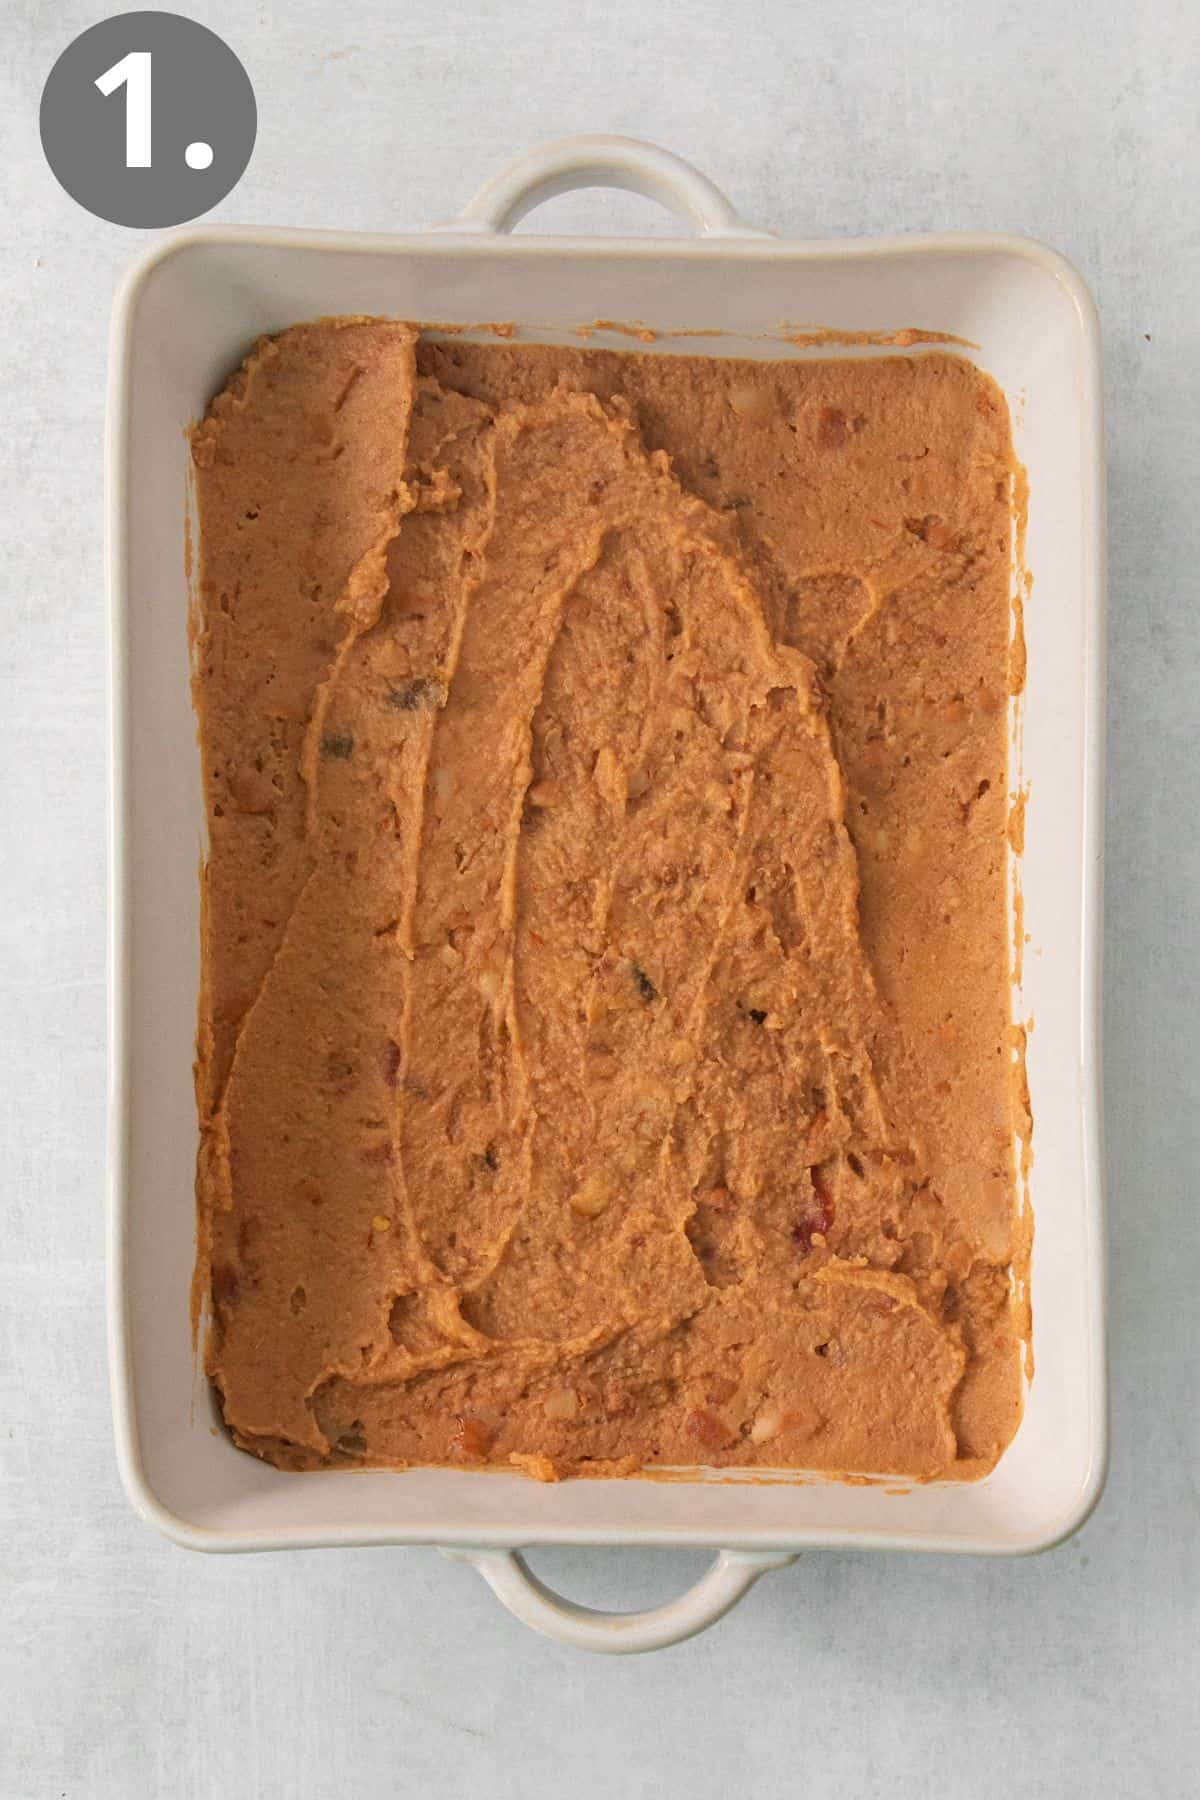 Refried beans layered in a baking dish